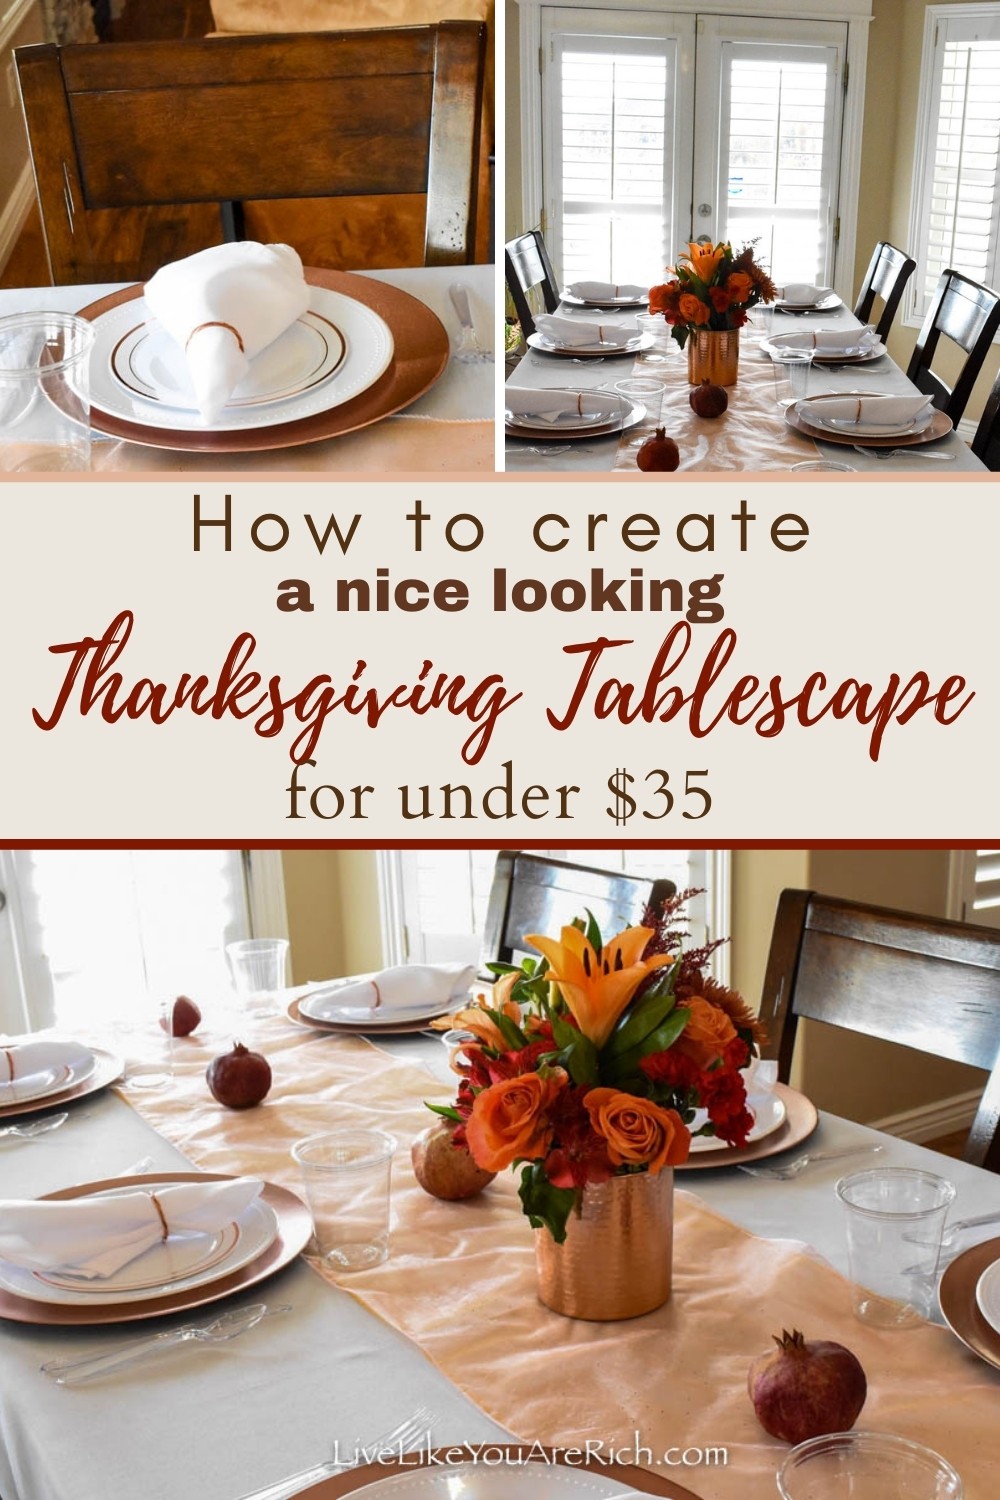 If you don’t have fine china, crystal, and real silverware, you can still have a nice looking tablescape! This inexpensive thanksgiving tablescape cost less than $35.00 to put together, plus there was little-to-no clean up. I’ll share my money-saving tips below. Here is how to create a nice looking yet inexpensive tablescape for under $35.00. #thanksgiving #thanksgivingtablescape